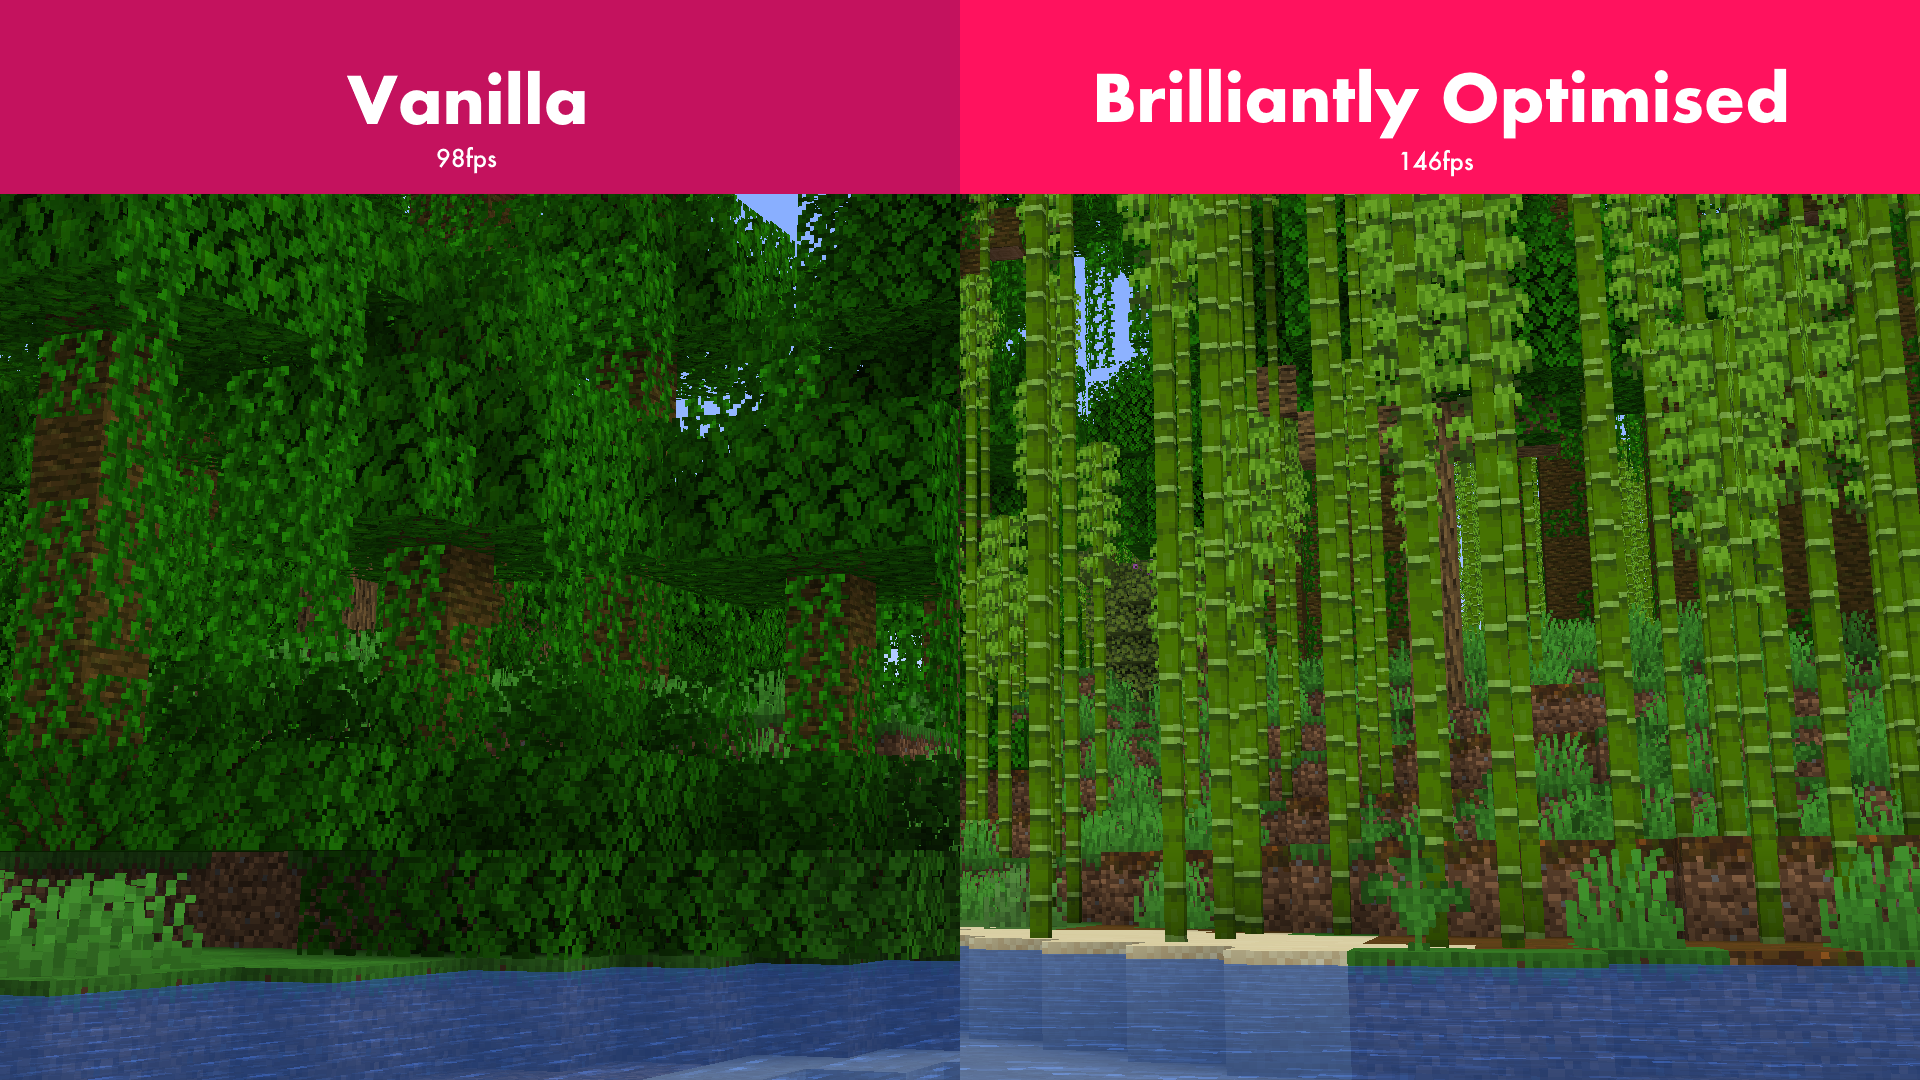 A genuine comparison between Vanilla and BO. No, Bo won't give you 420fps (usually).